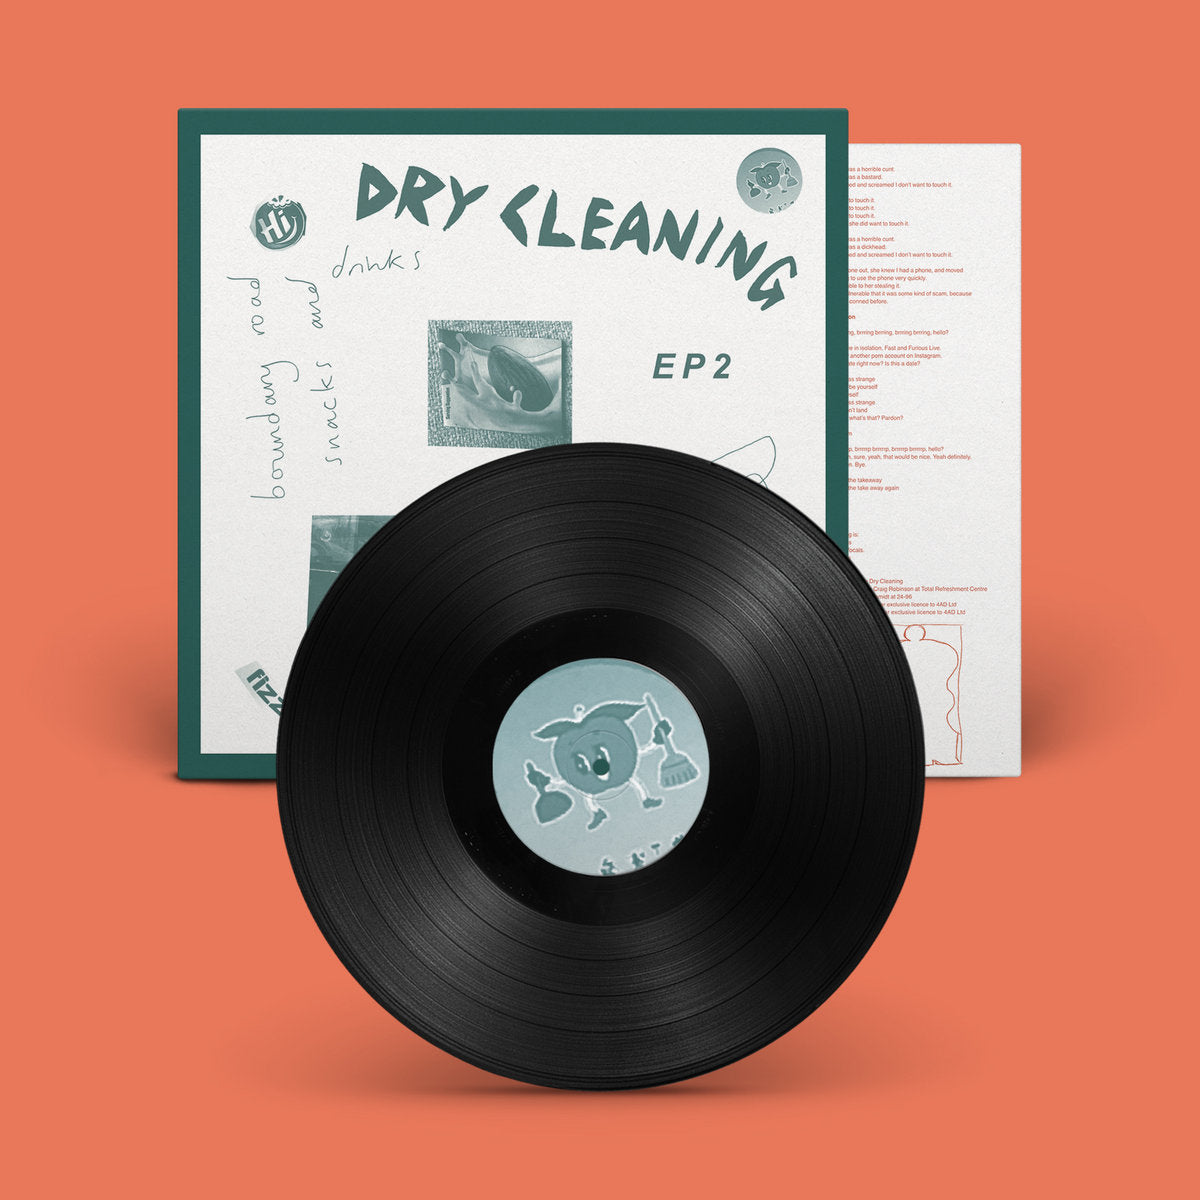 Dry Cleaning - Boundary Road Snacks and Drinks / Sweet Princess EPs